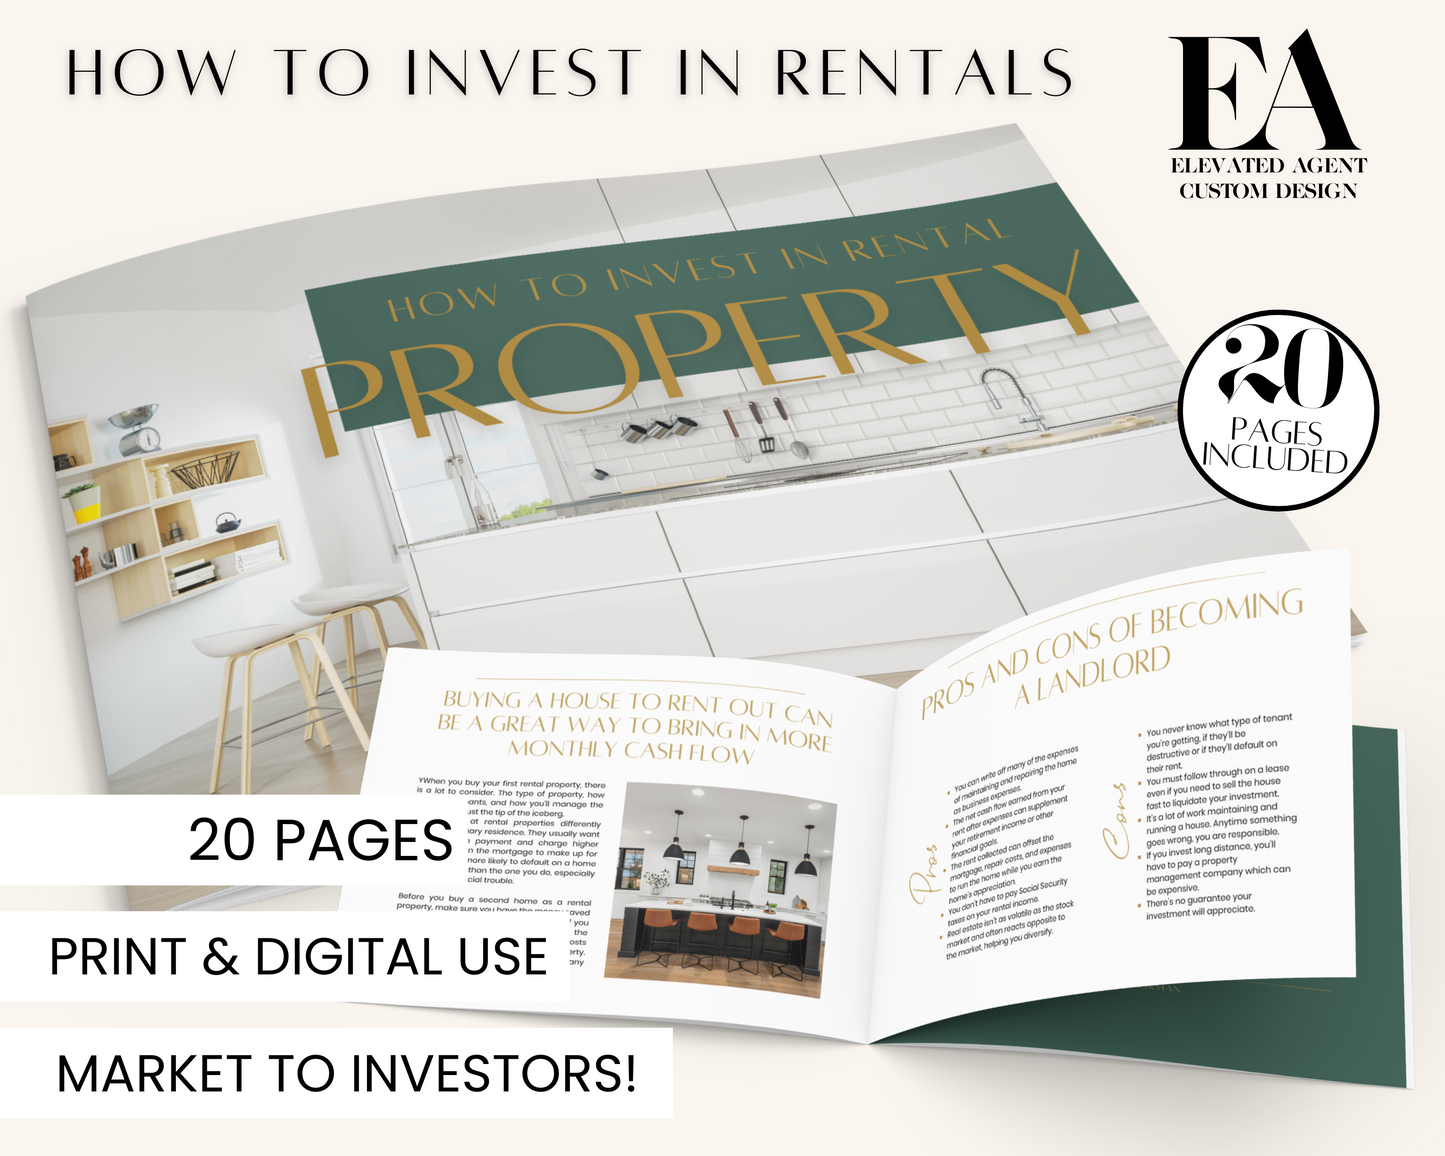 Investment Property Guide - Exclusive